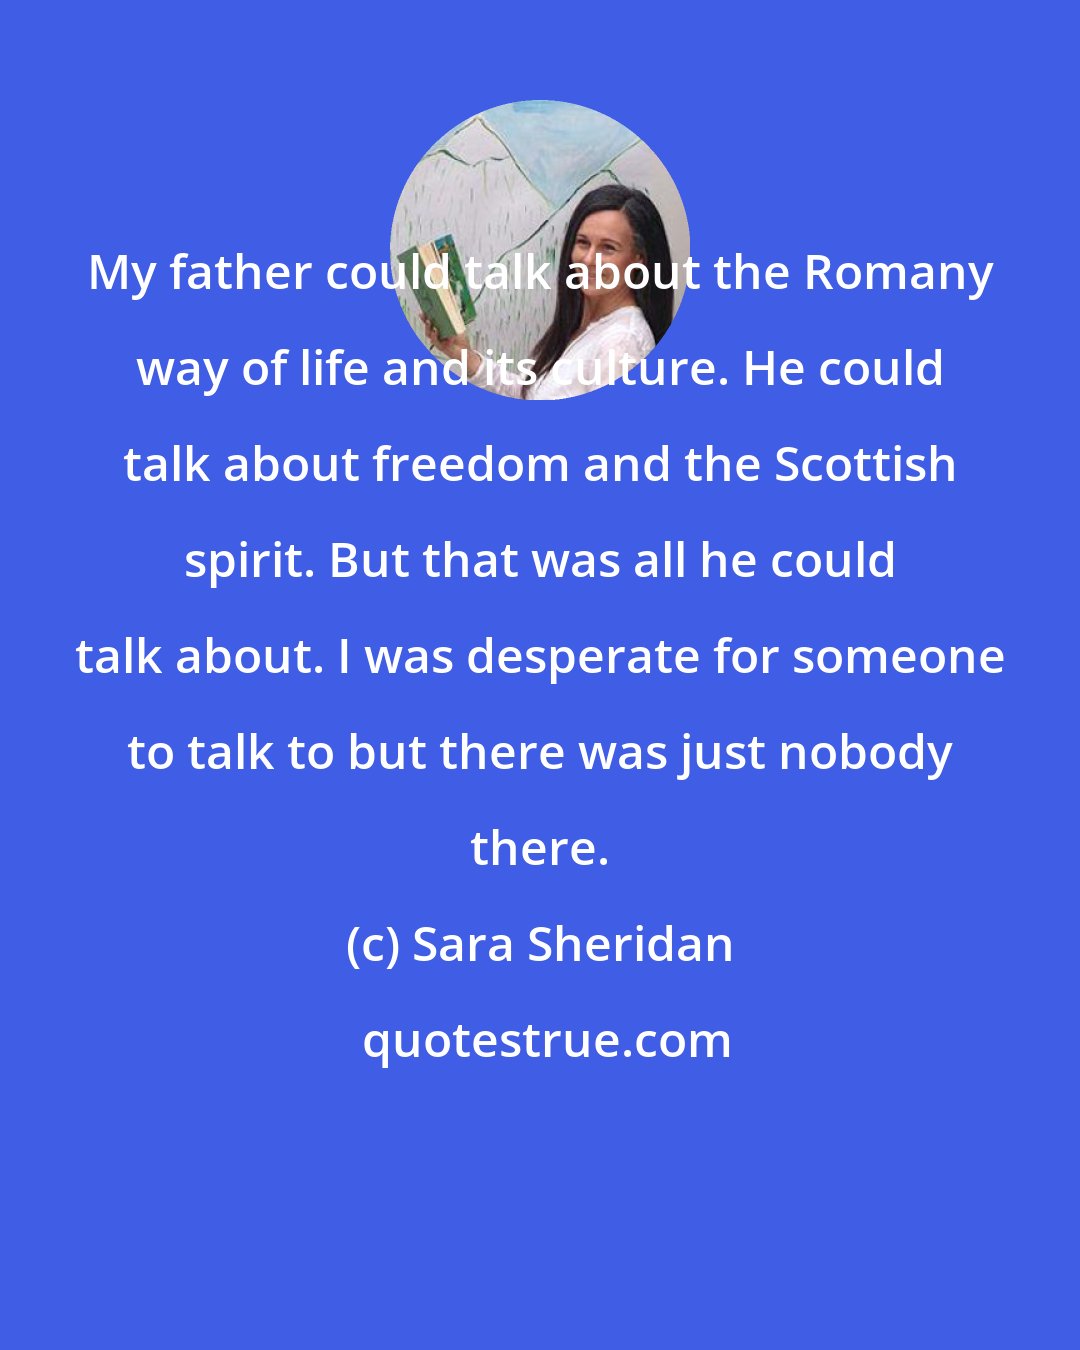 Sara Sheridan: My father could talk about the Romany way of life and its culture. He could talk about freedom and the Scottish spirit. But that was all he could talk about. I was desperate for someone to talk to but there was just nobody there.